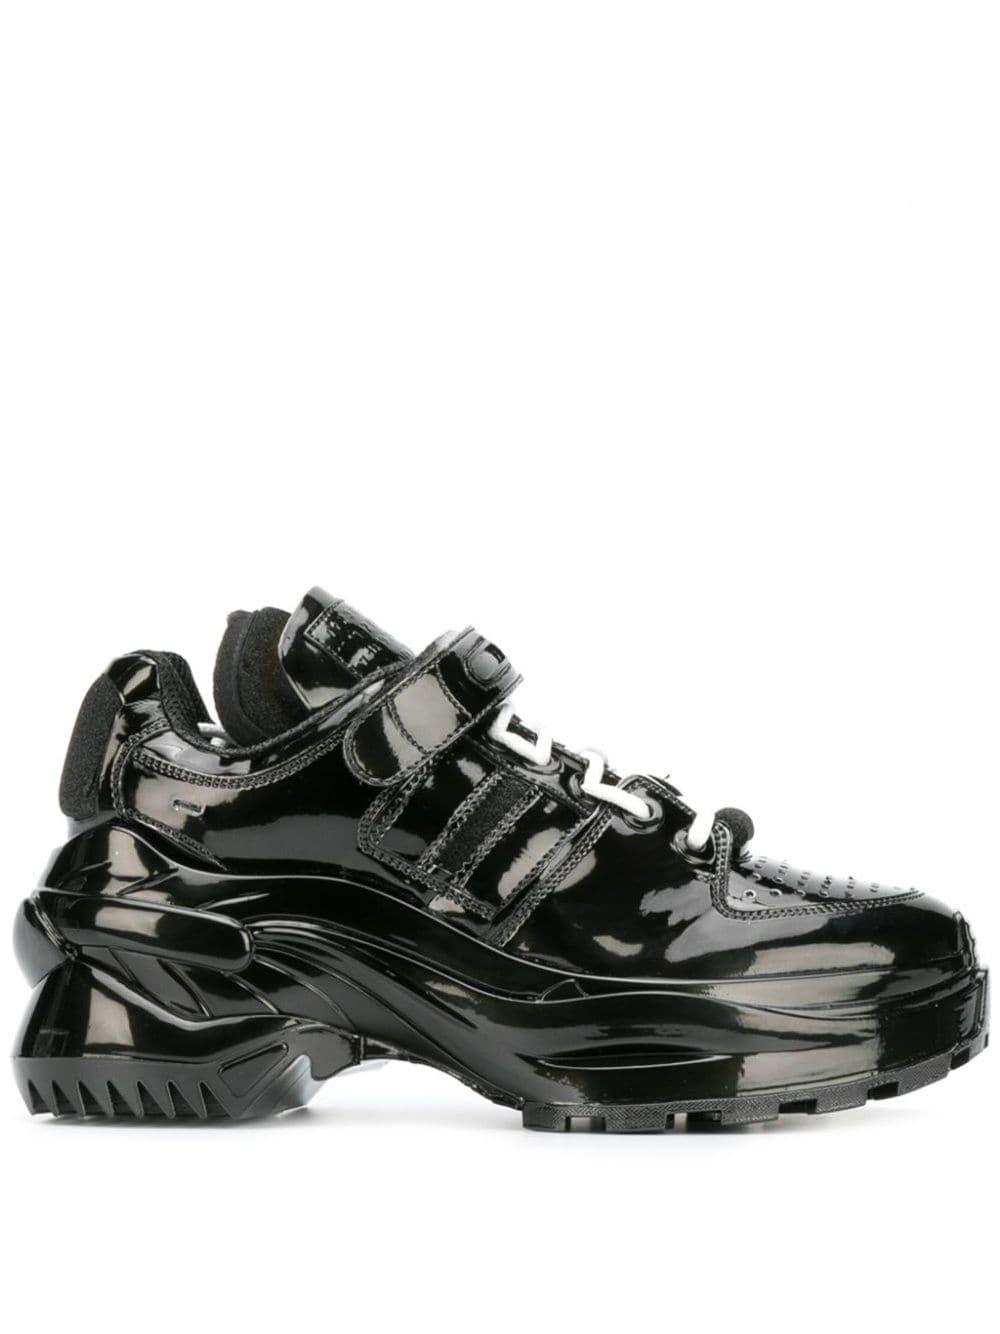 Maison Margiela Chunky Sole Sneakers in Black - Save 34% - Lyst